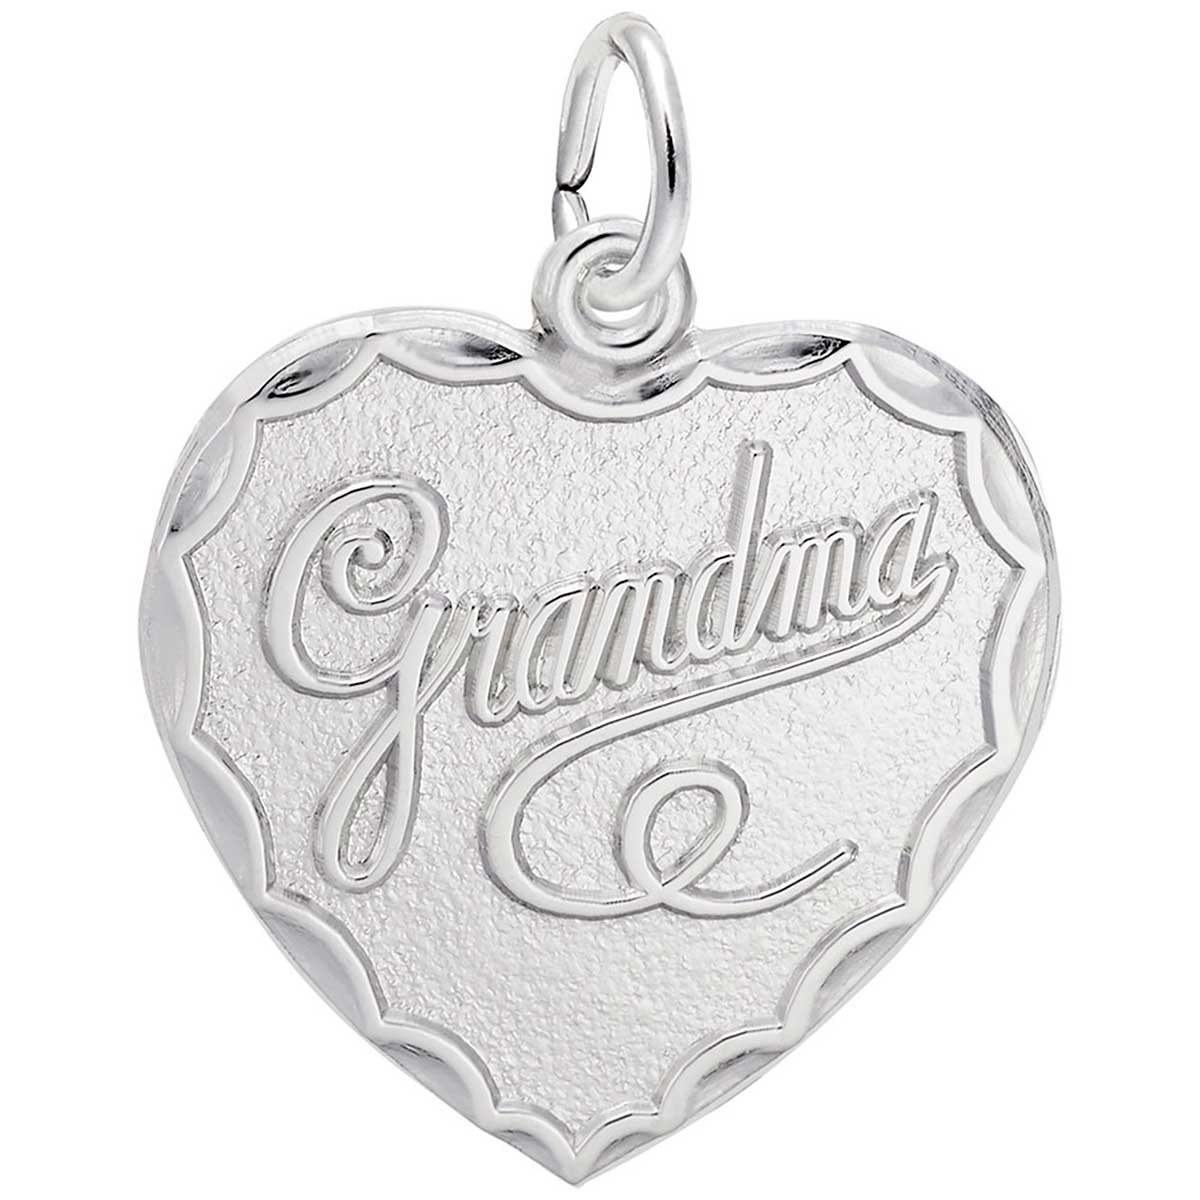 Rembrandt Marked Old C B Radio Sterling Silver Charm or Pendant.